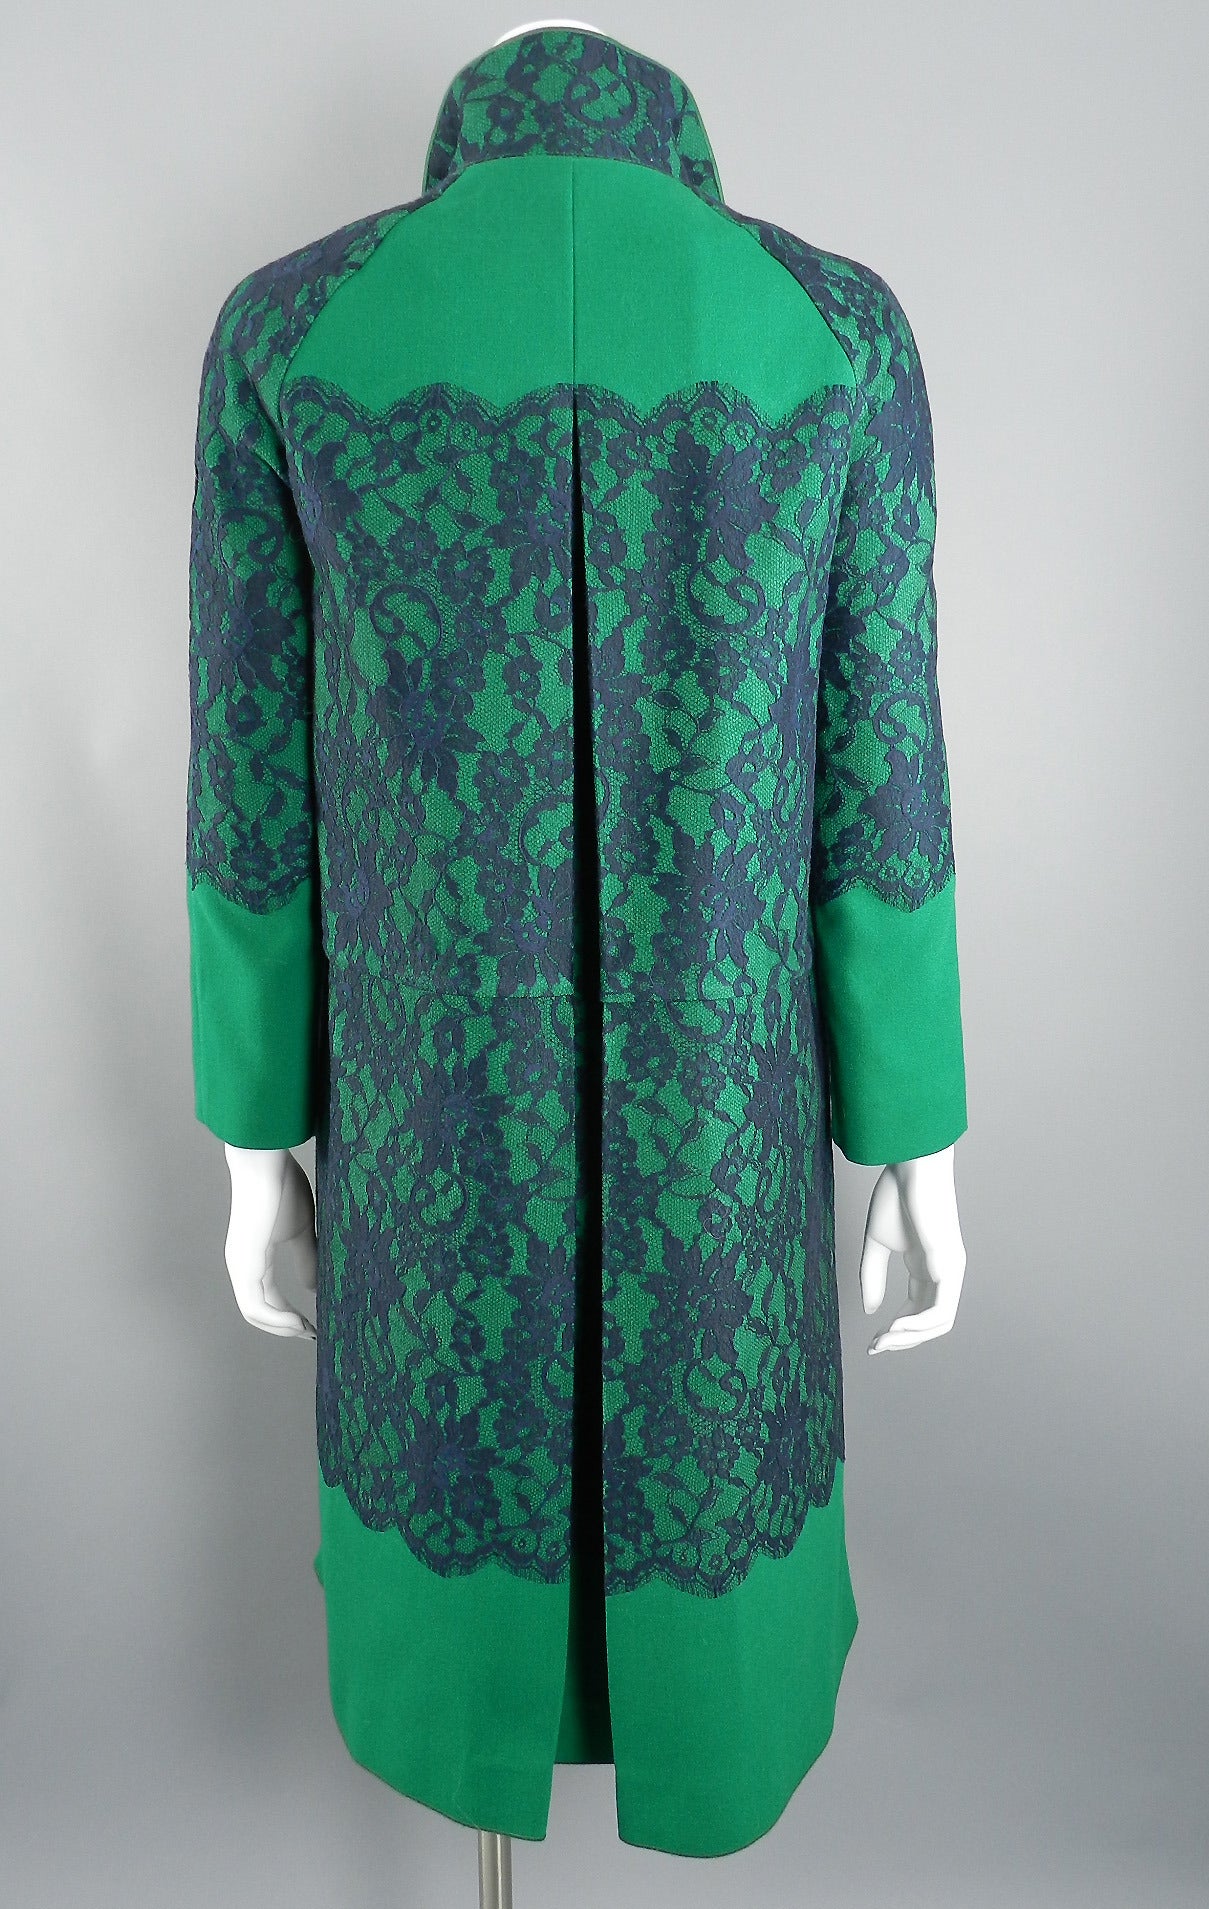 Erdem 2013 Pre Fall Green and Pink Lace Coat Jacket 1